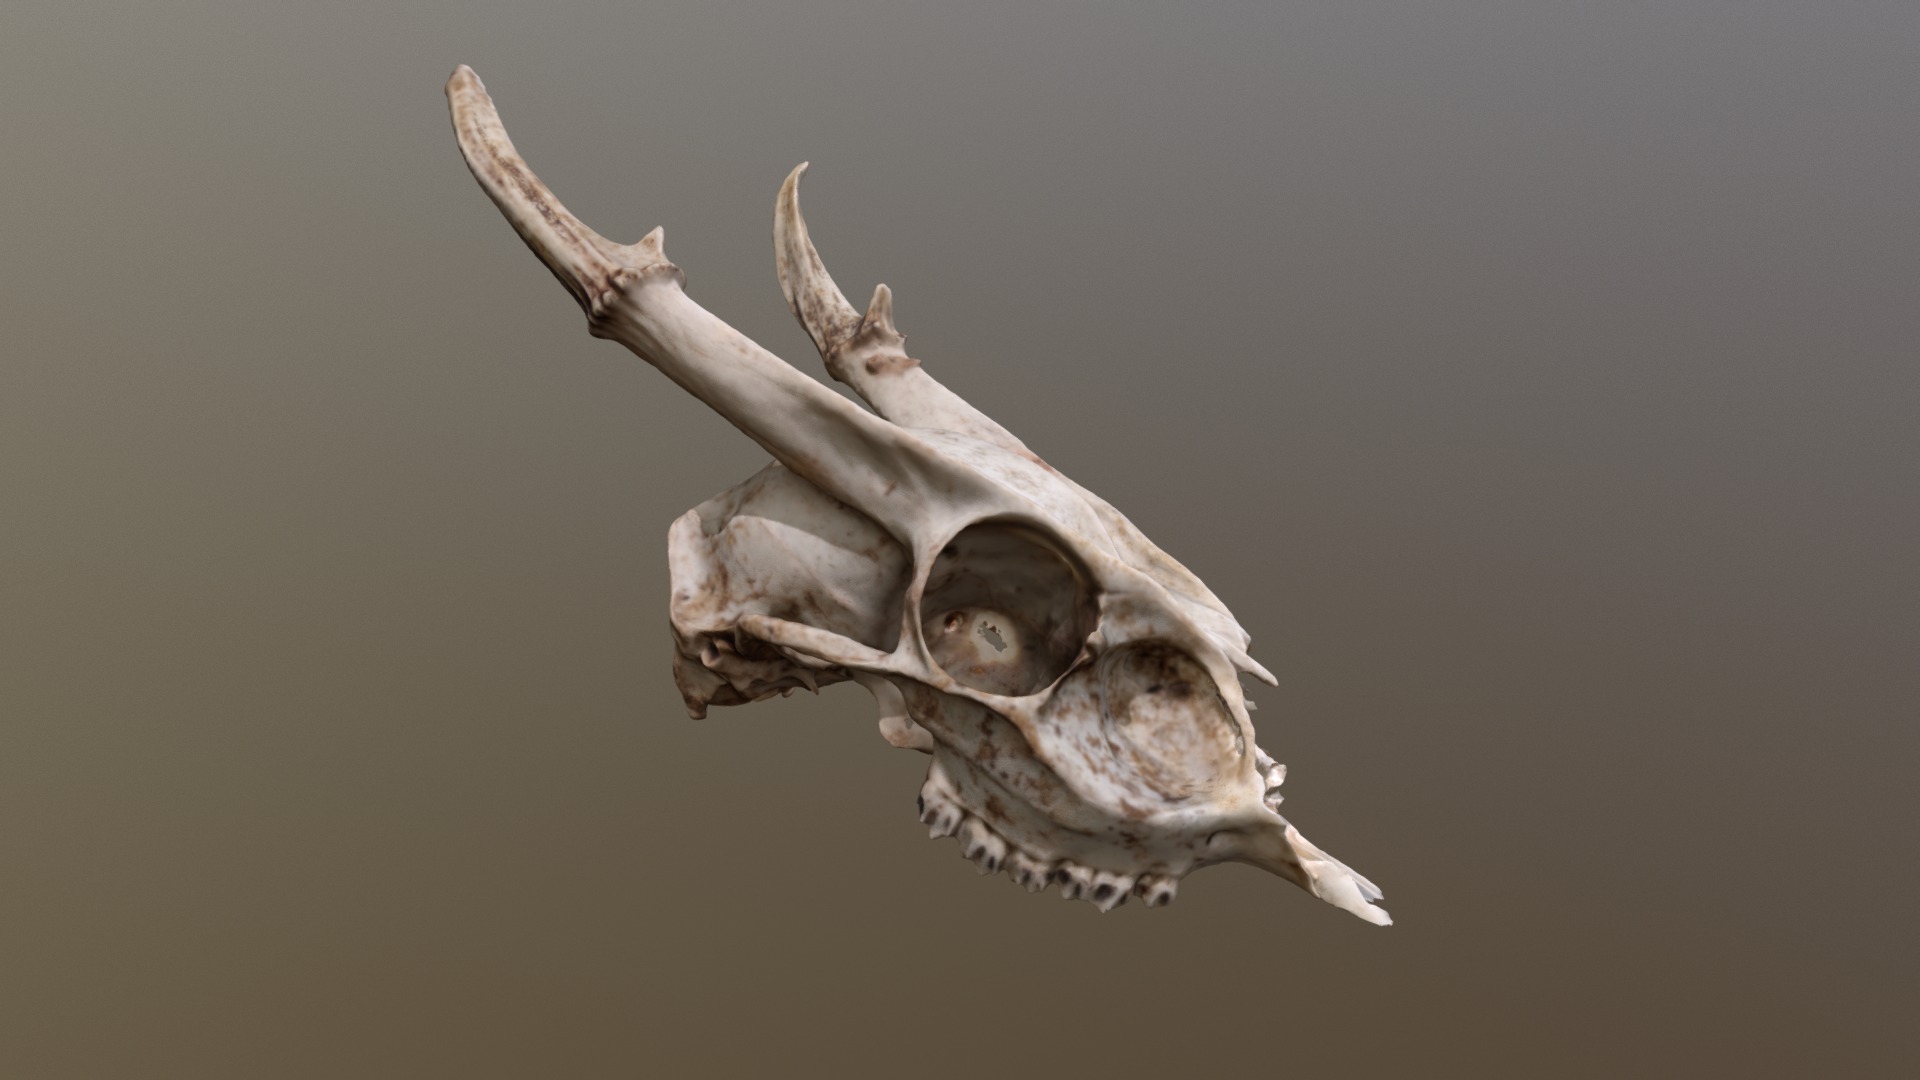 3D model Muntjac Deer Skull - This is a 3D model of the Muntjac Deer Skull. The 3D model is about a bird flying in the air.